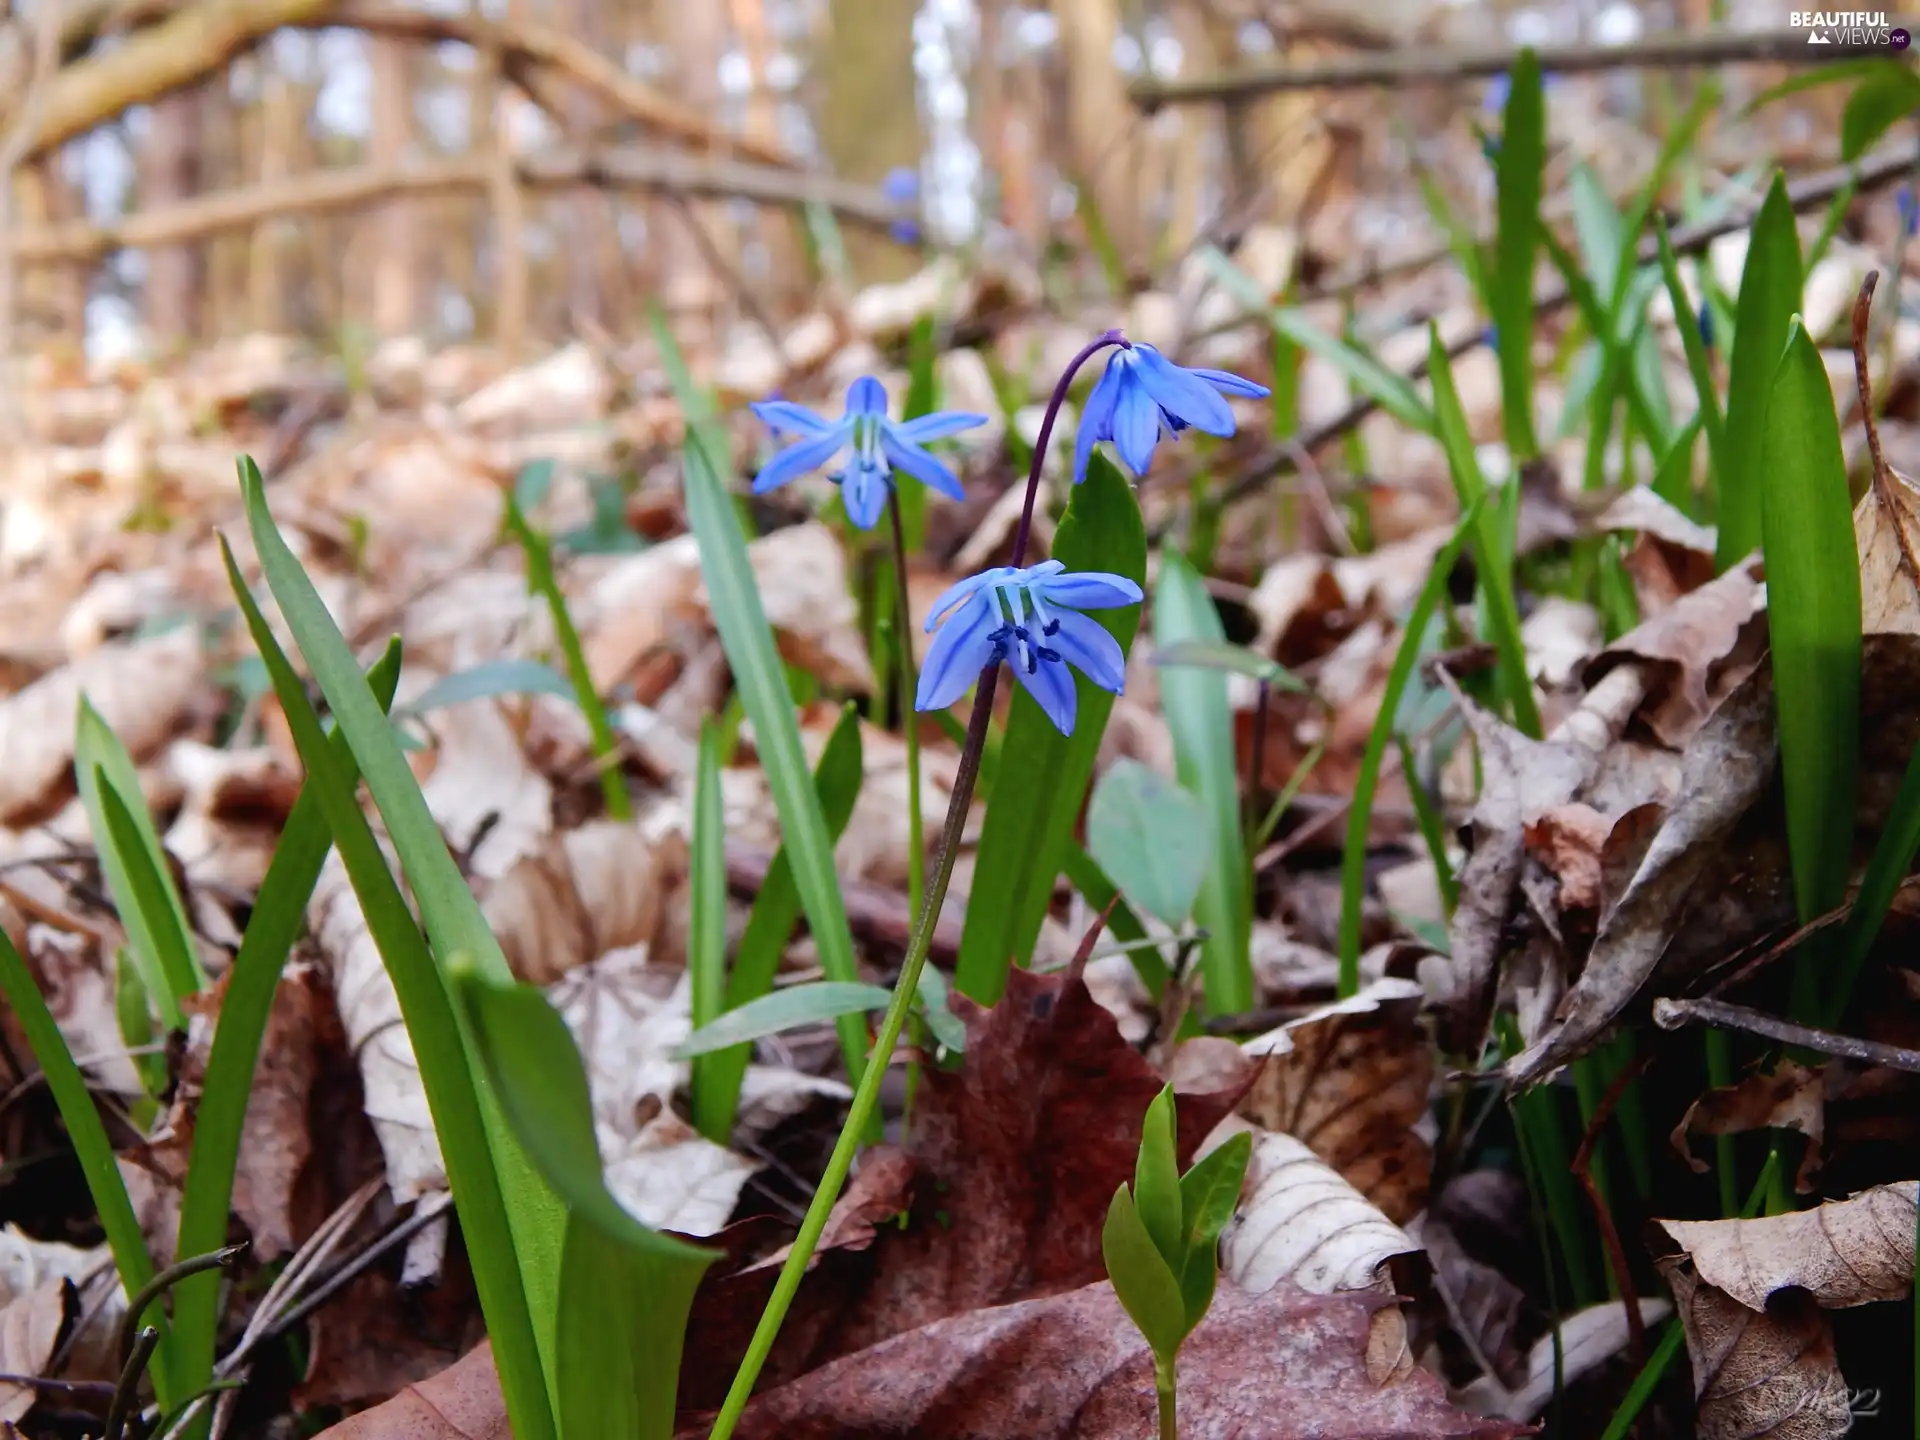 Leaf, Spring, Blue, Flowers, Siberian squill